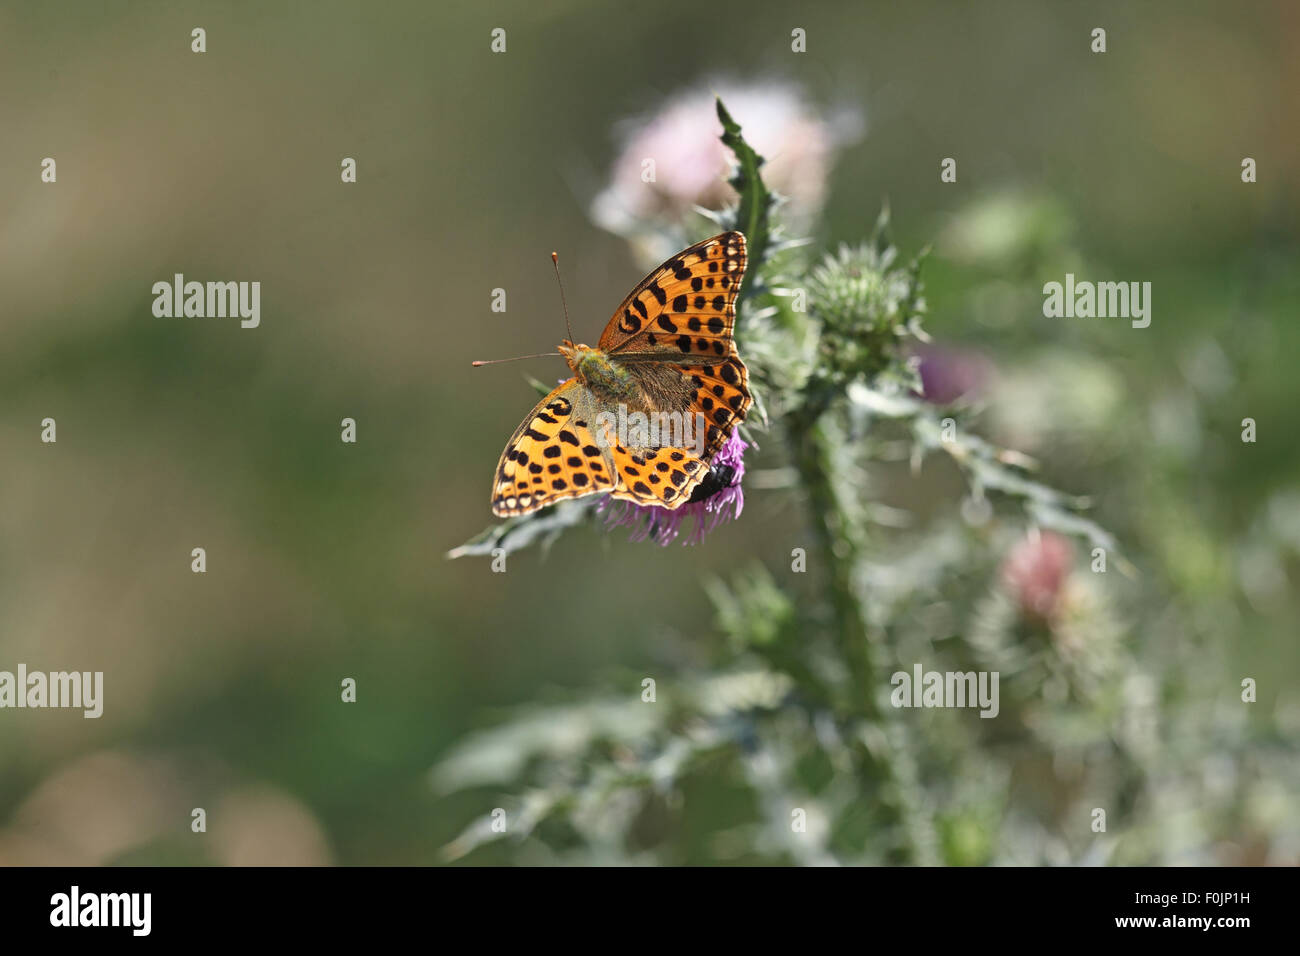 Queen of Spain fritillary Issoria lithonia taking nectar from thistle Stock Photo